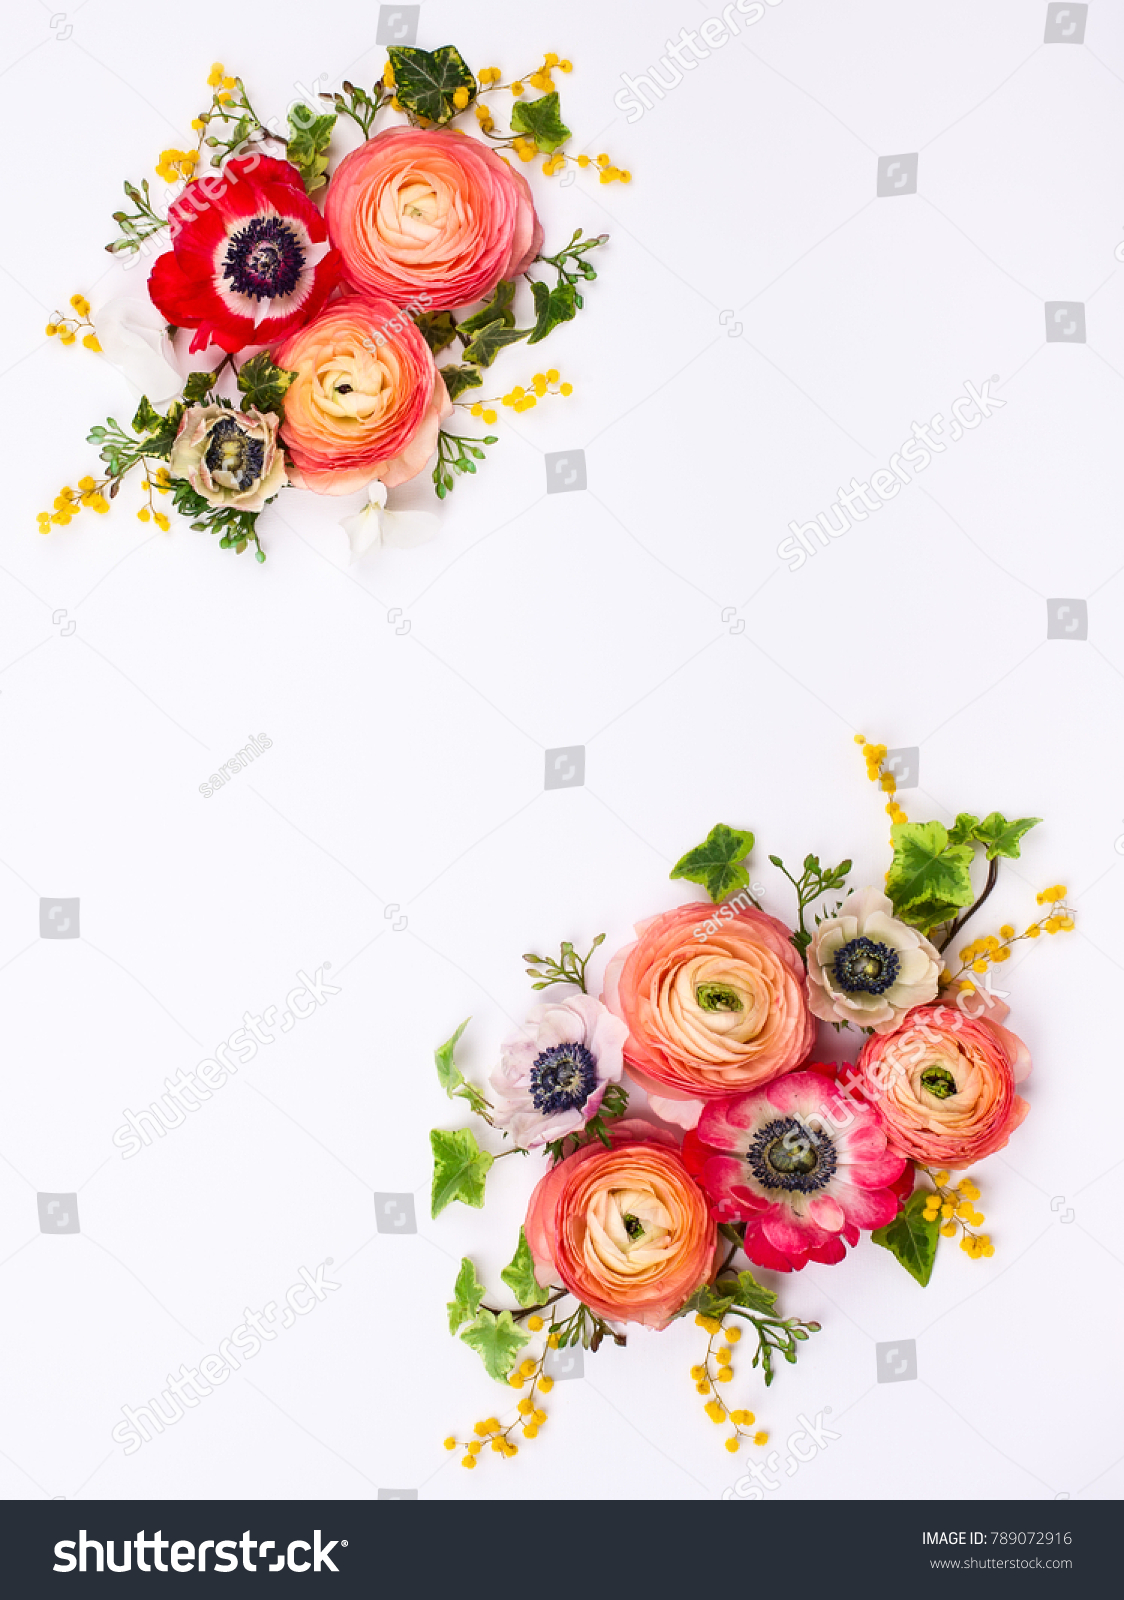 Festive flower composition made of fresh buttercups and anemone on the white background. Overhead view. #789072916